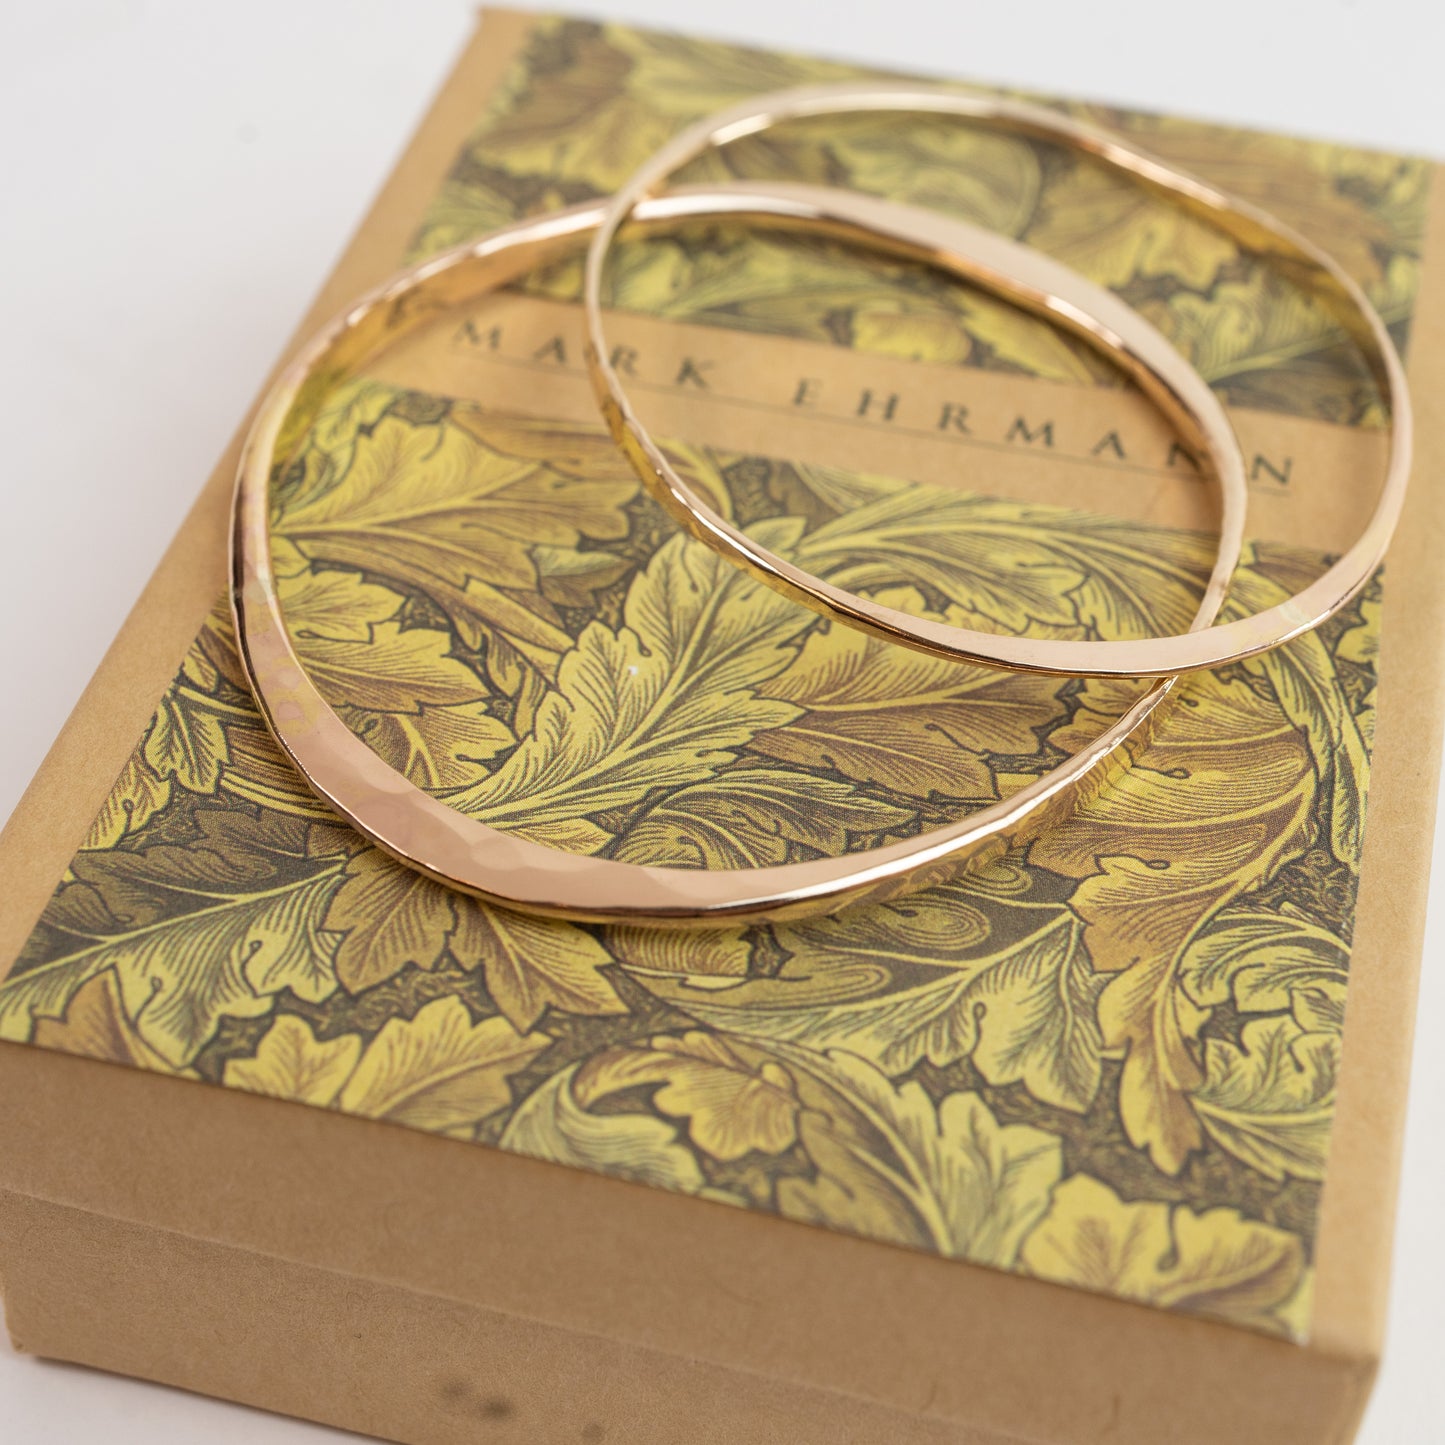 Bangle Bracelets - 14k Solid Yellow Gold Custom hand forged Oval